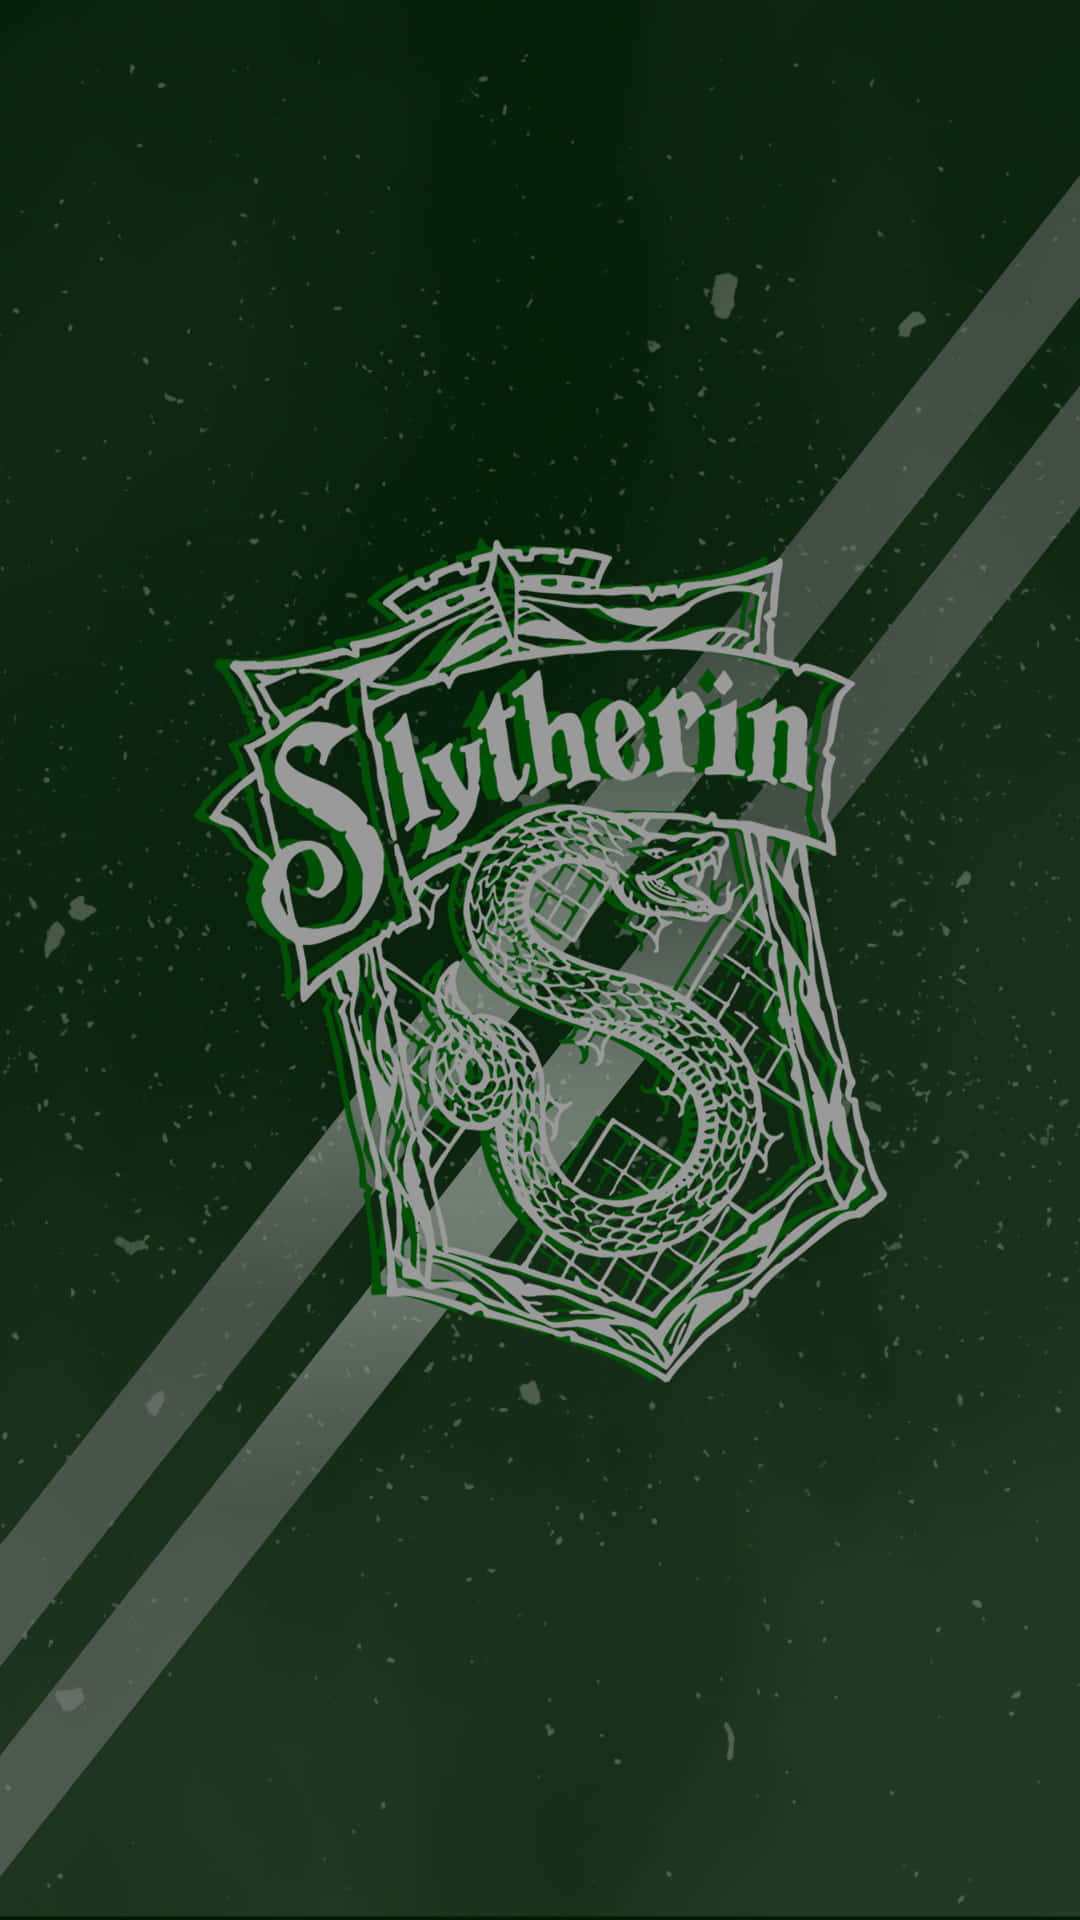 Slytherinlife In Swedish Would Be 